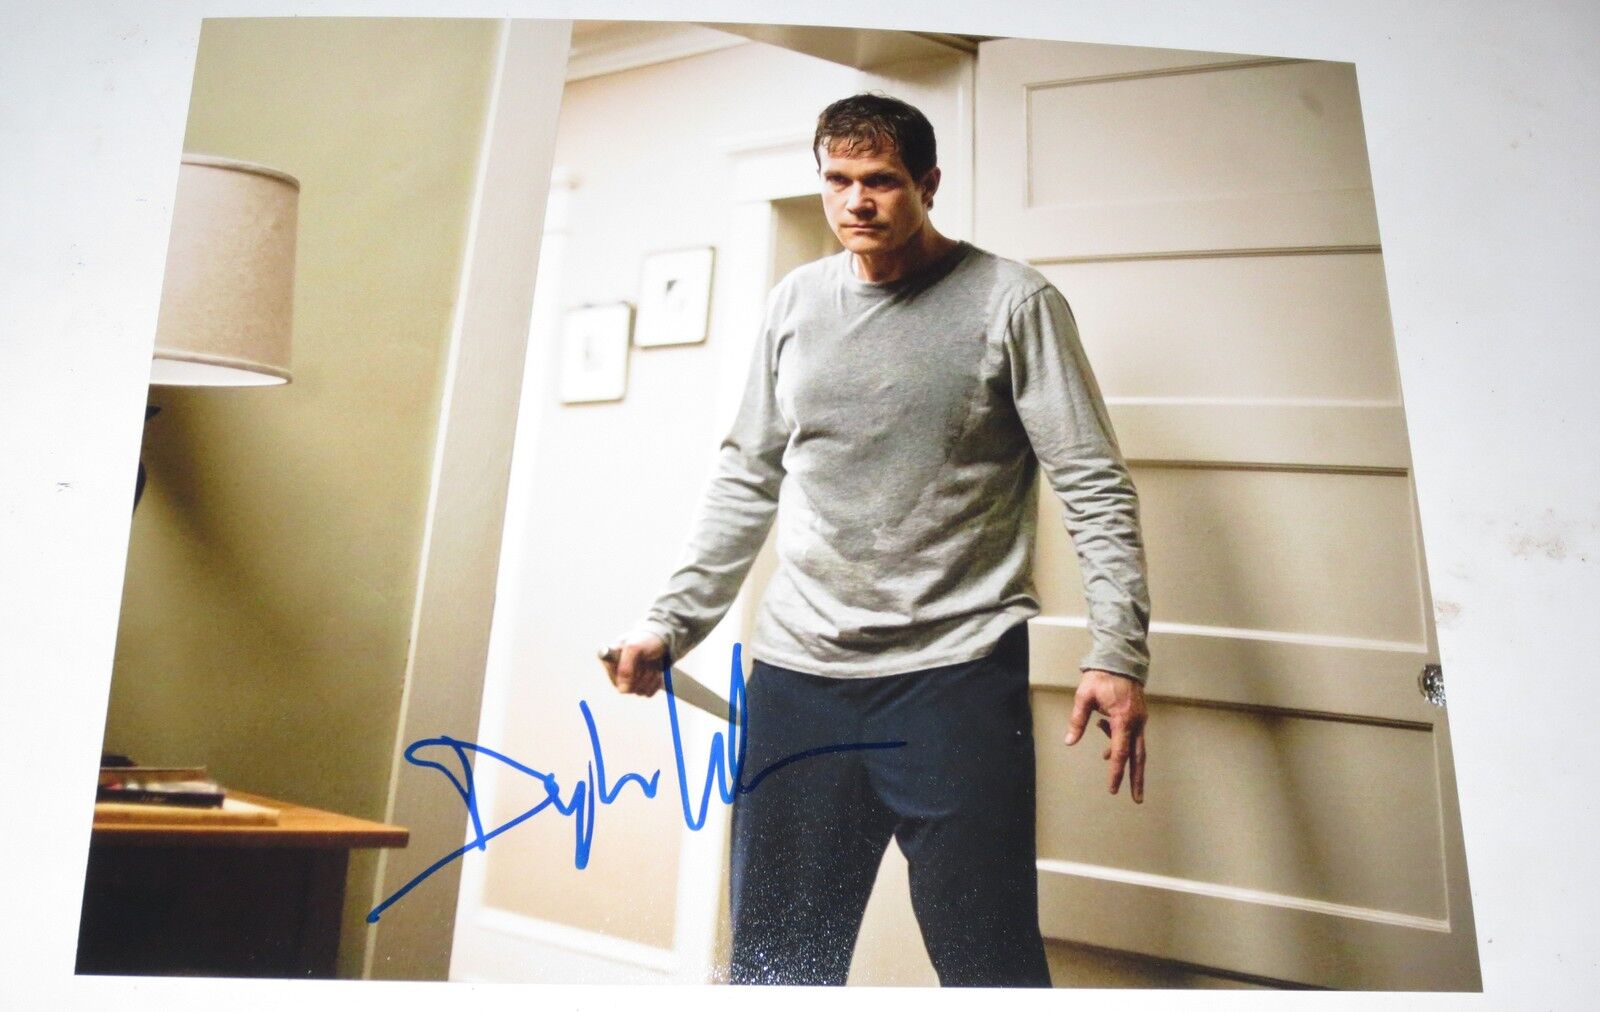 DYLAN WALSH SIGNED 8X10 PHOTO AUTHENTIC AUTOGRAPH NIP TUCK COA A